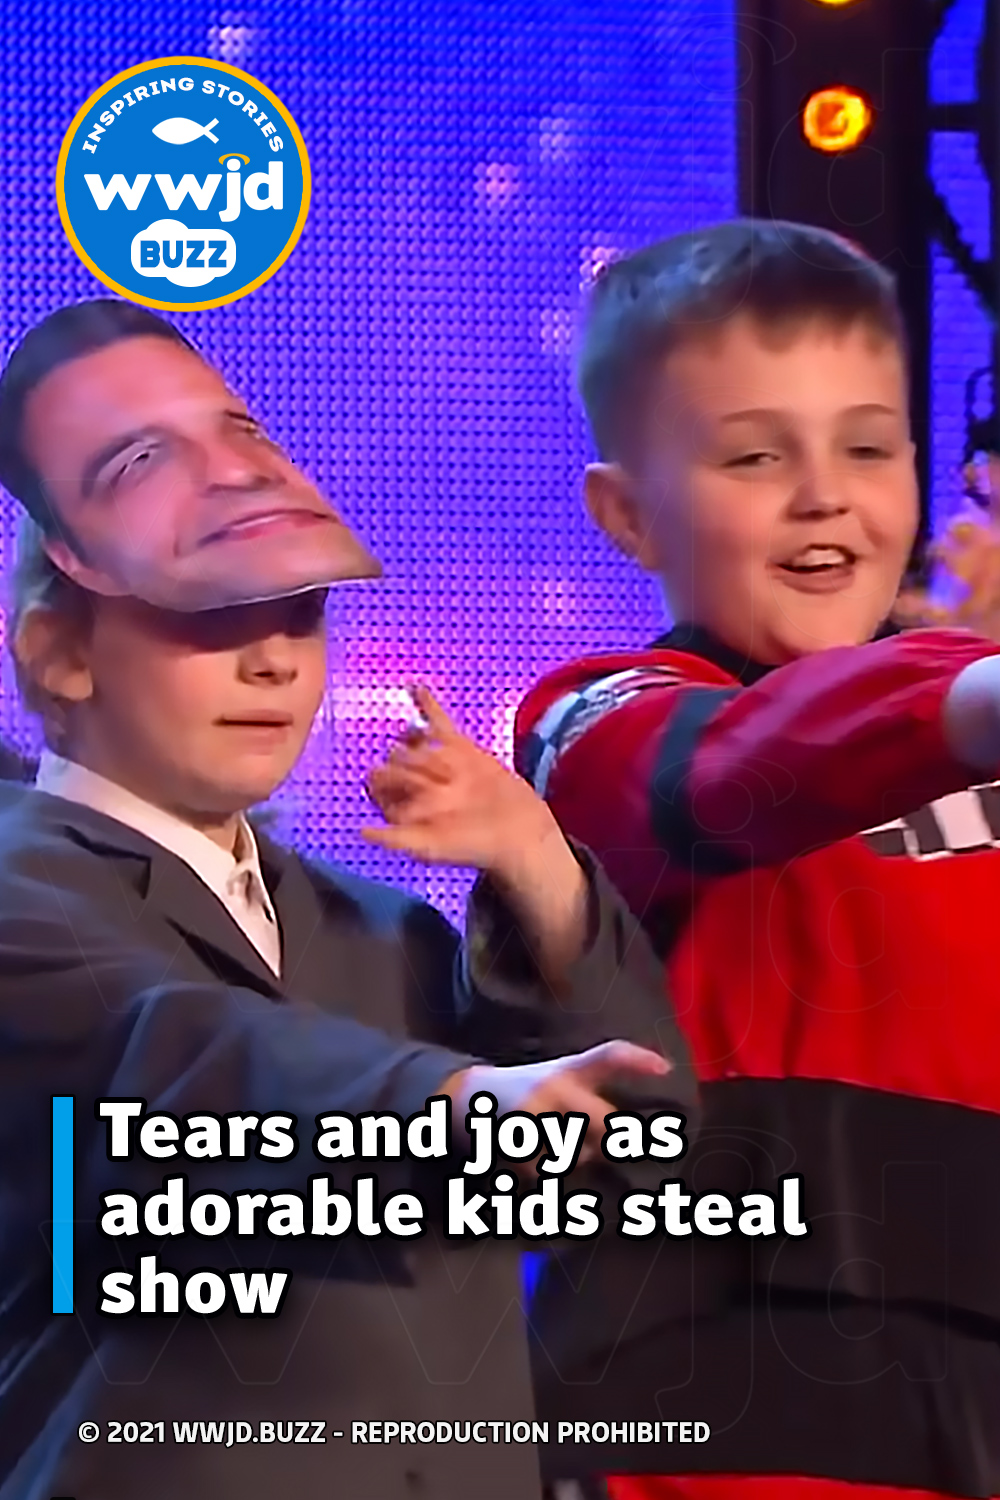 Tears and joy as adorable kids steal show